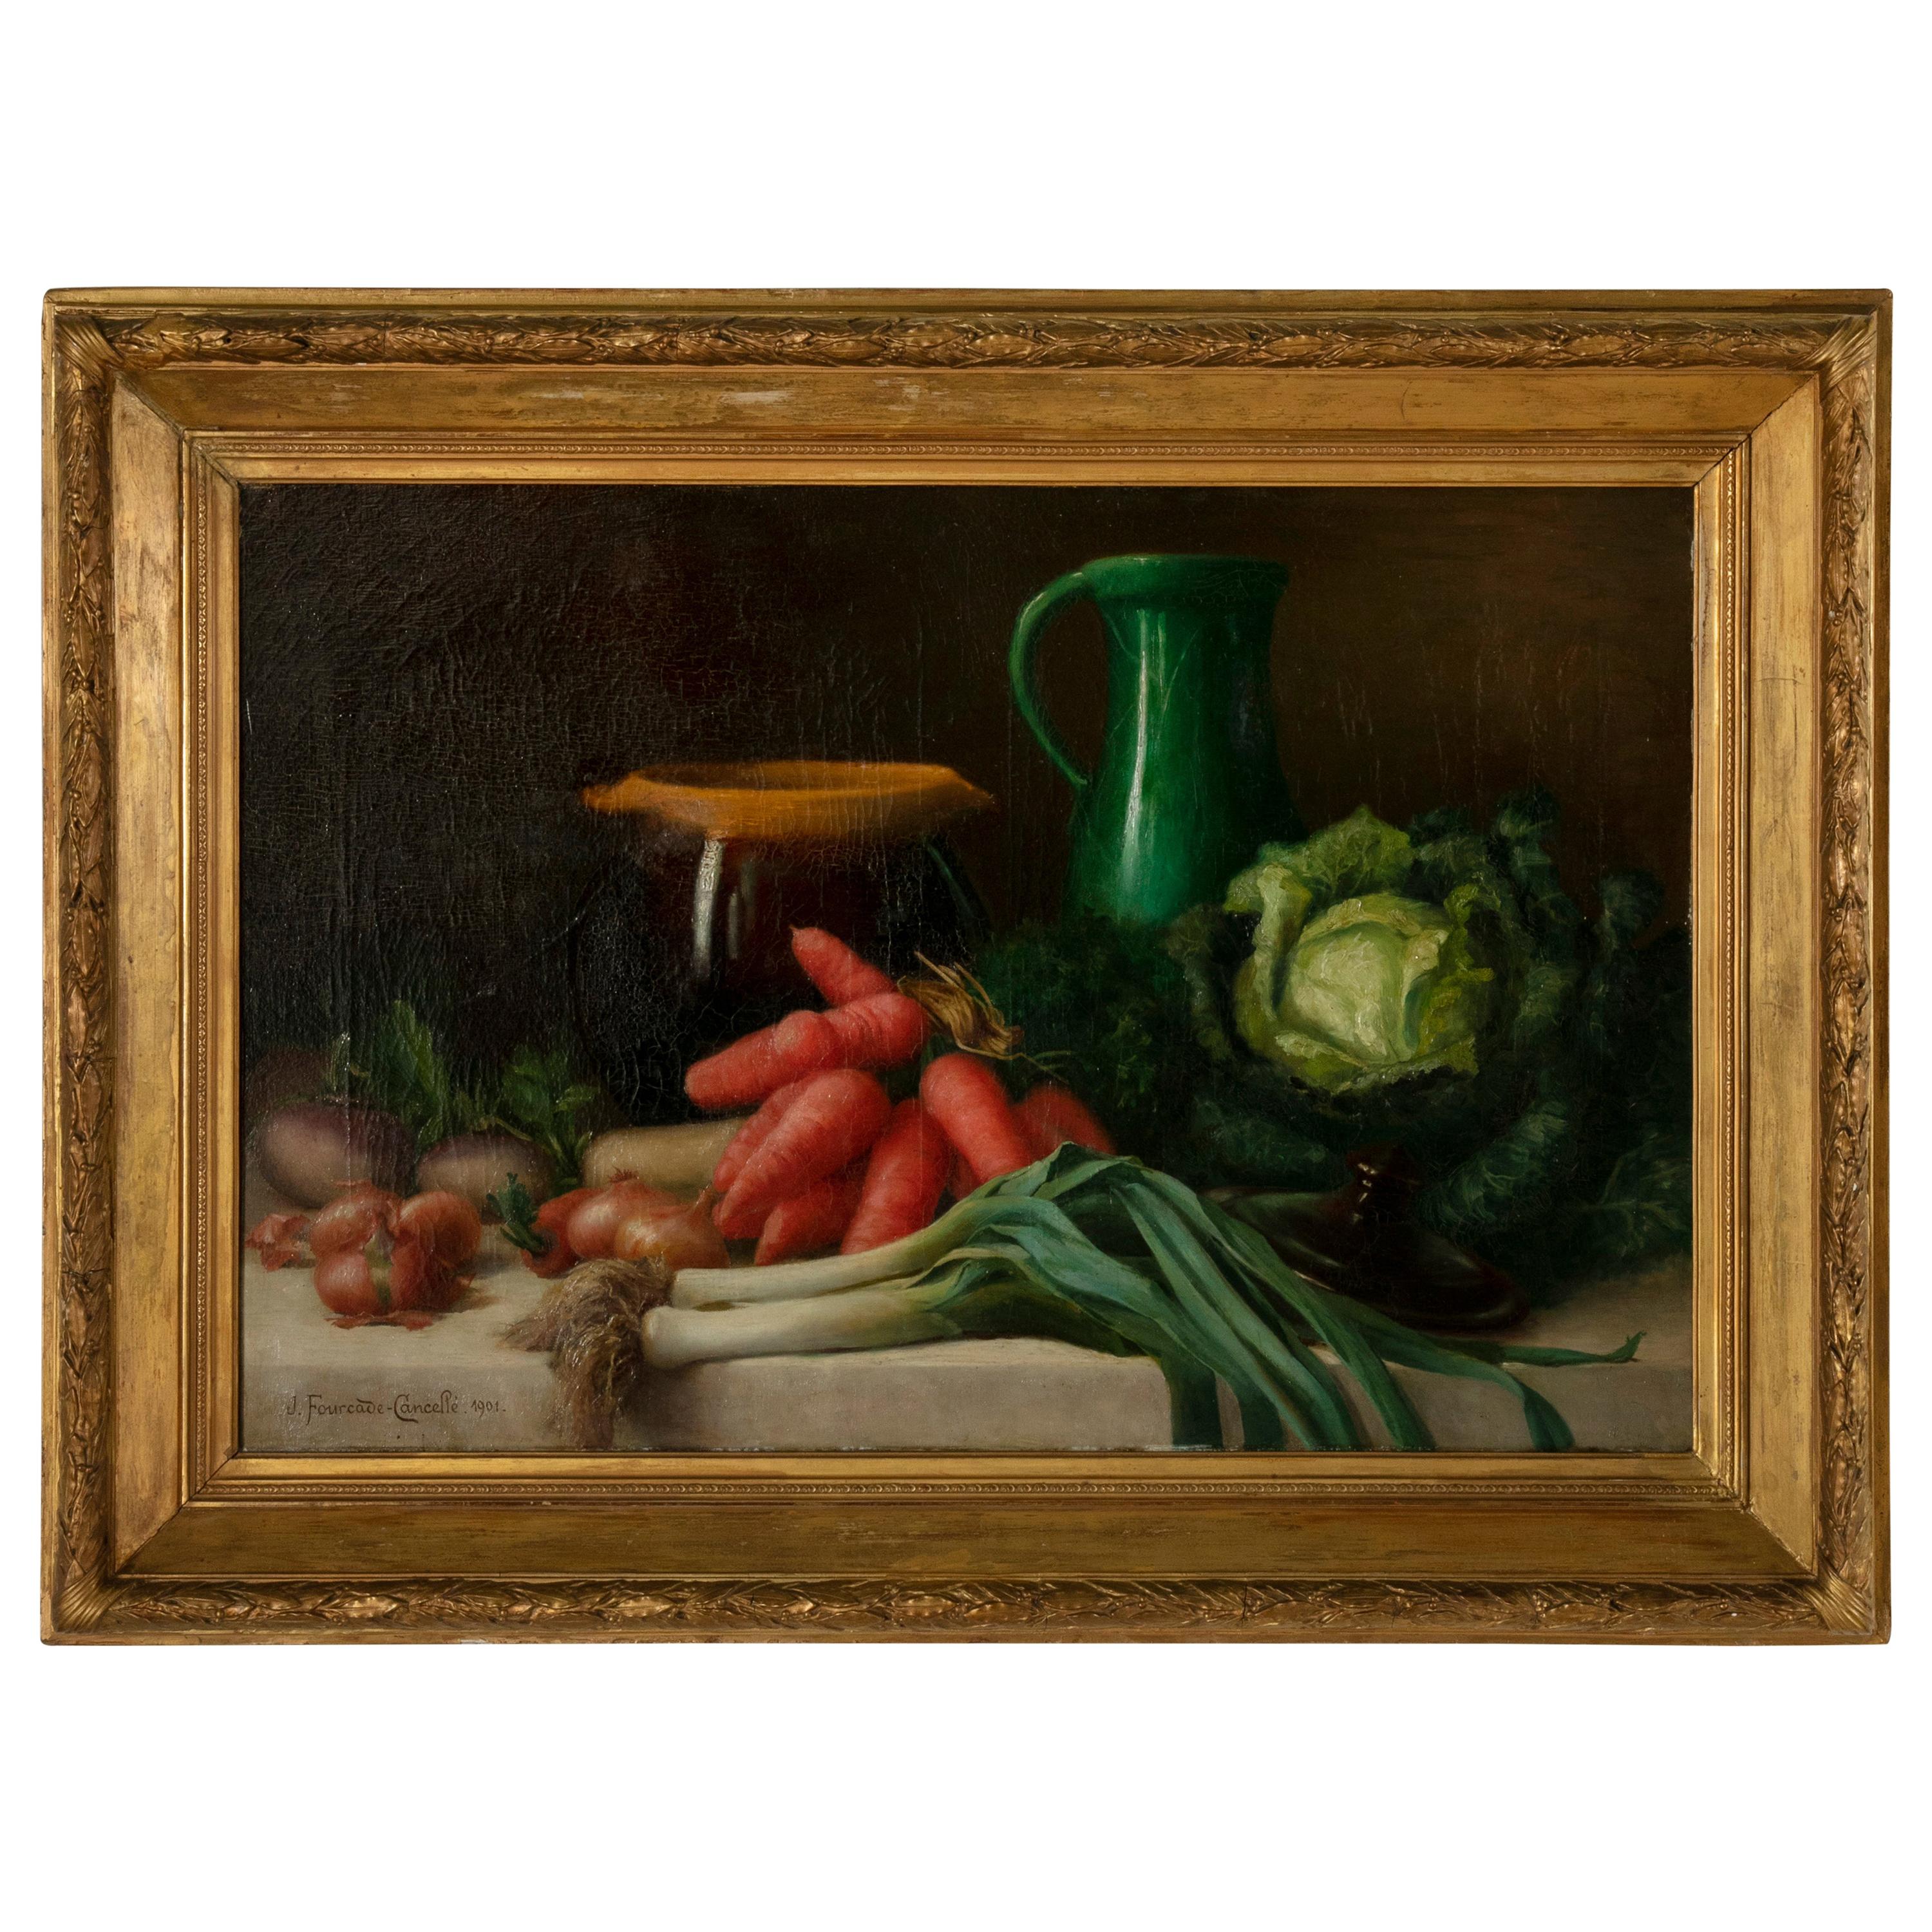 Large French Signed Oil on Canvas Still Life Painting in Giltwood Frame c. 1901